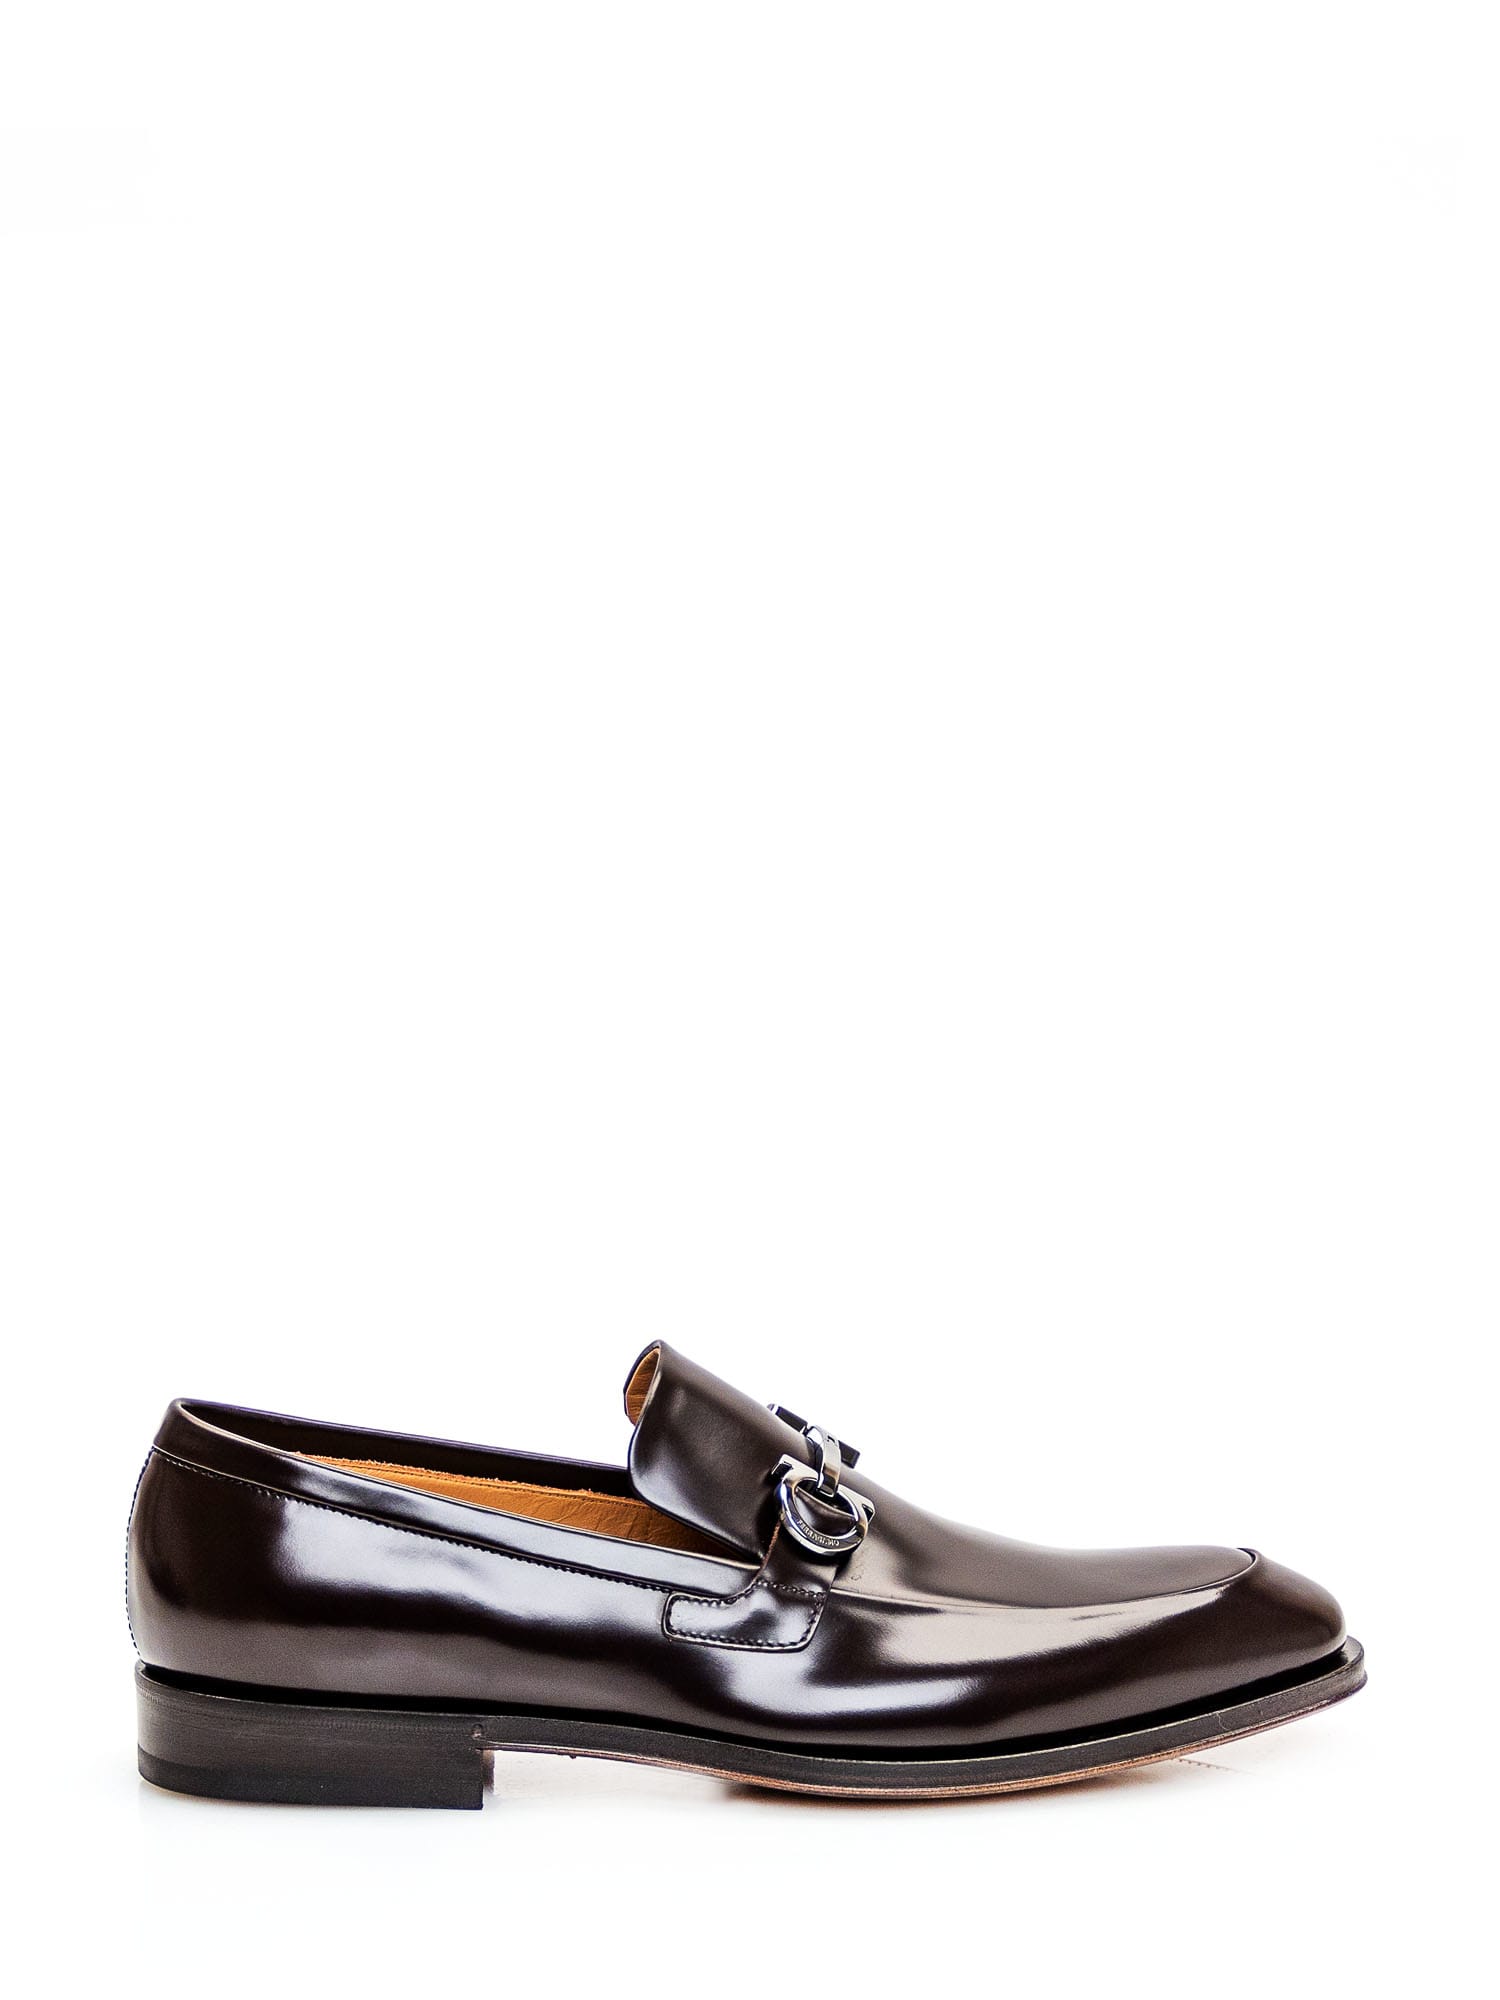 Ferragamo Loafer With Hook Ornament In Hickory